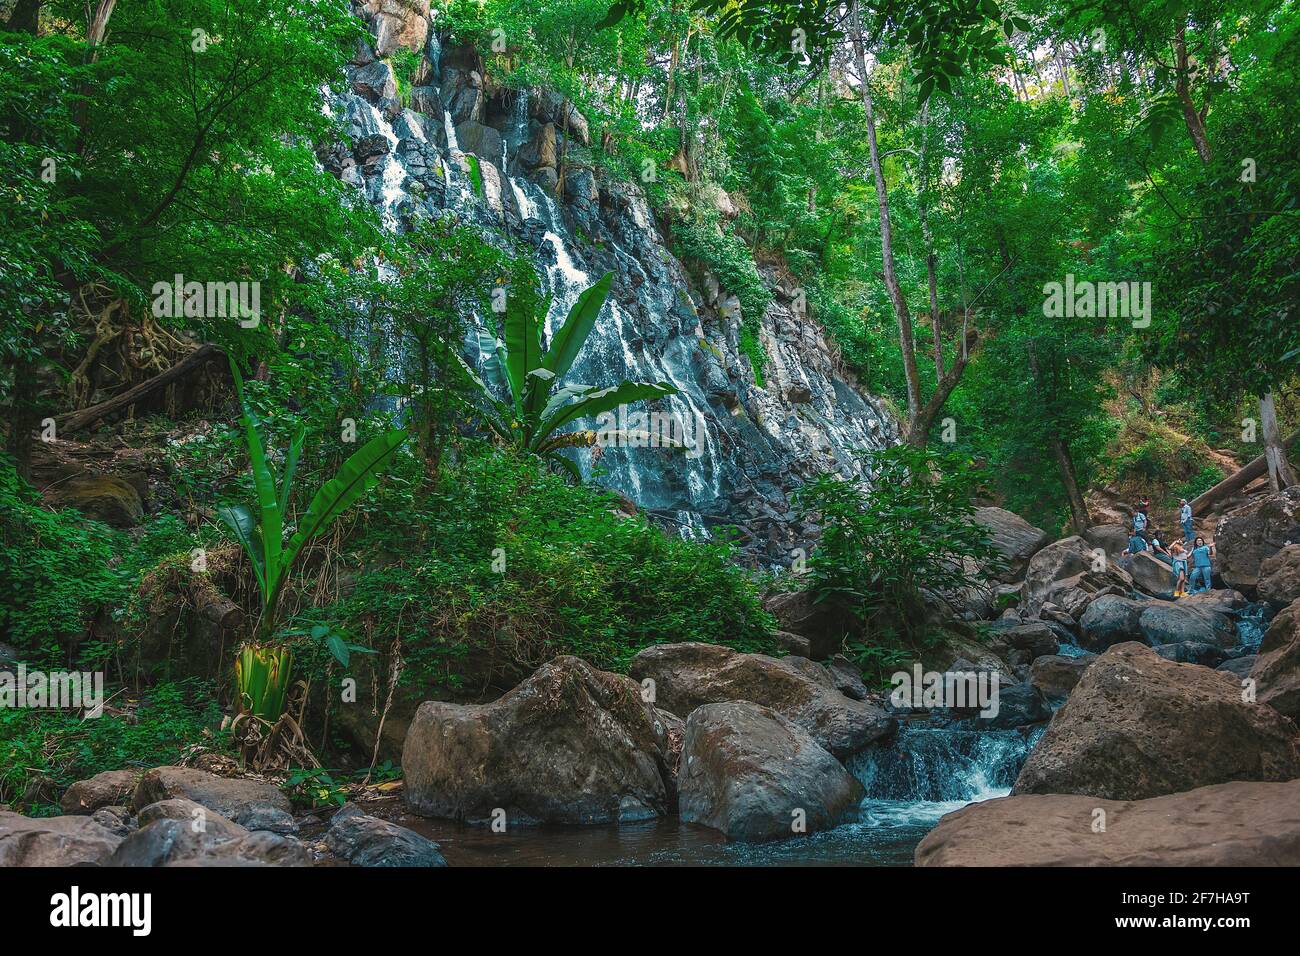 Mexico, Valle de Bravo, Panoramic view of the beautiful natural waterfall 'Velo de Novia' surrounded by vegetation and large stones Stock Photo